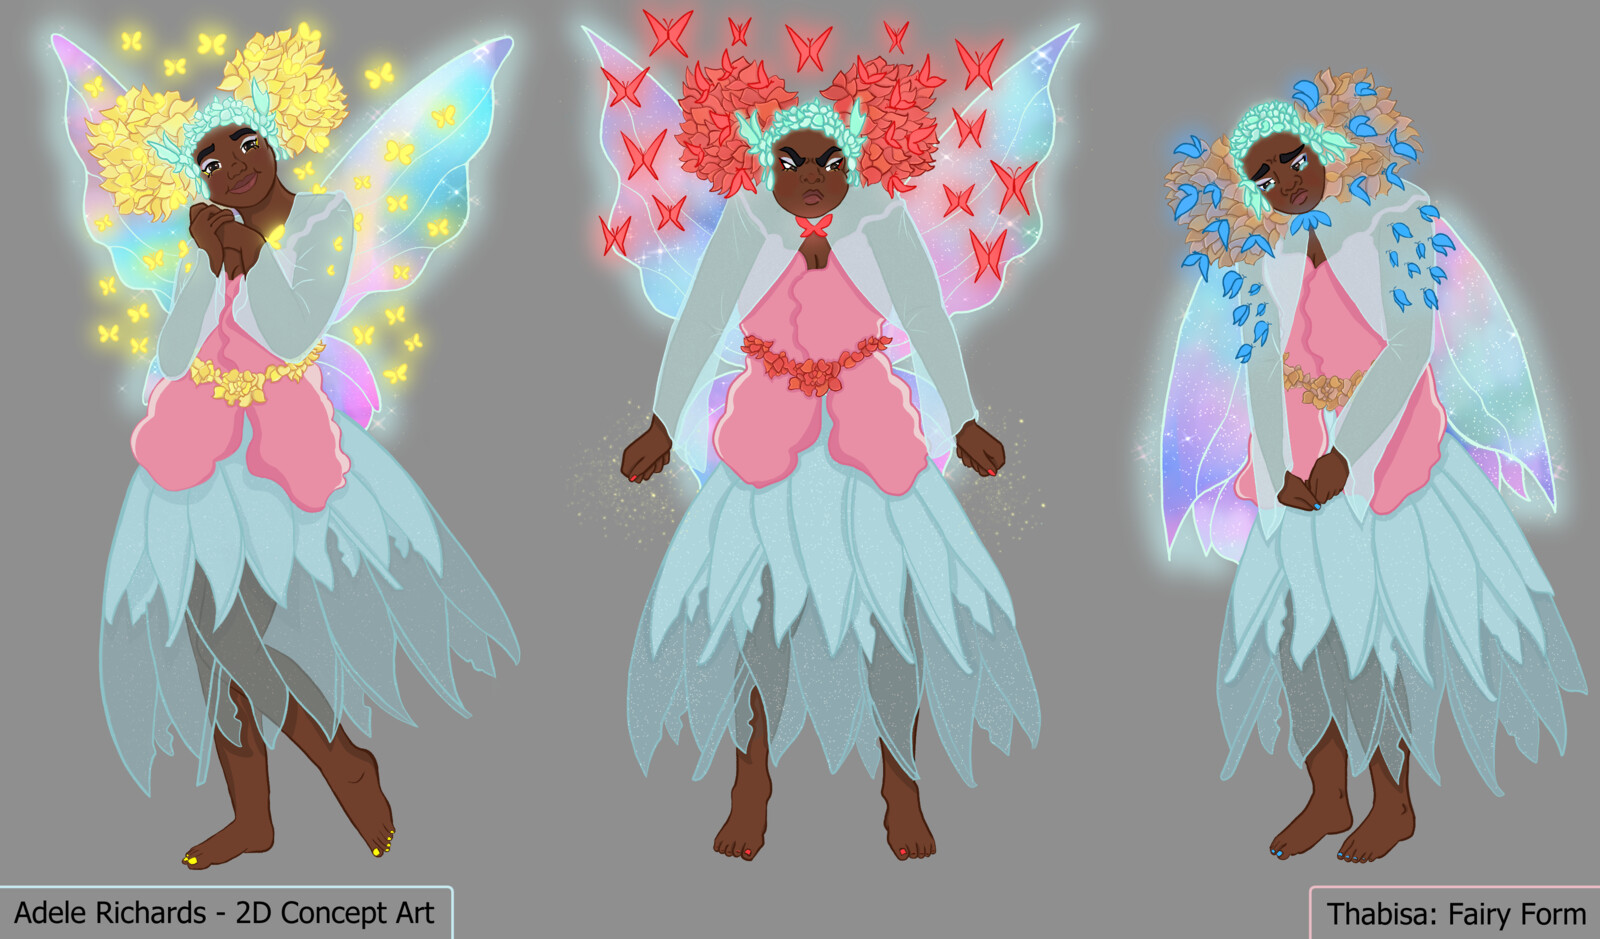 Final Result of Fairy Version